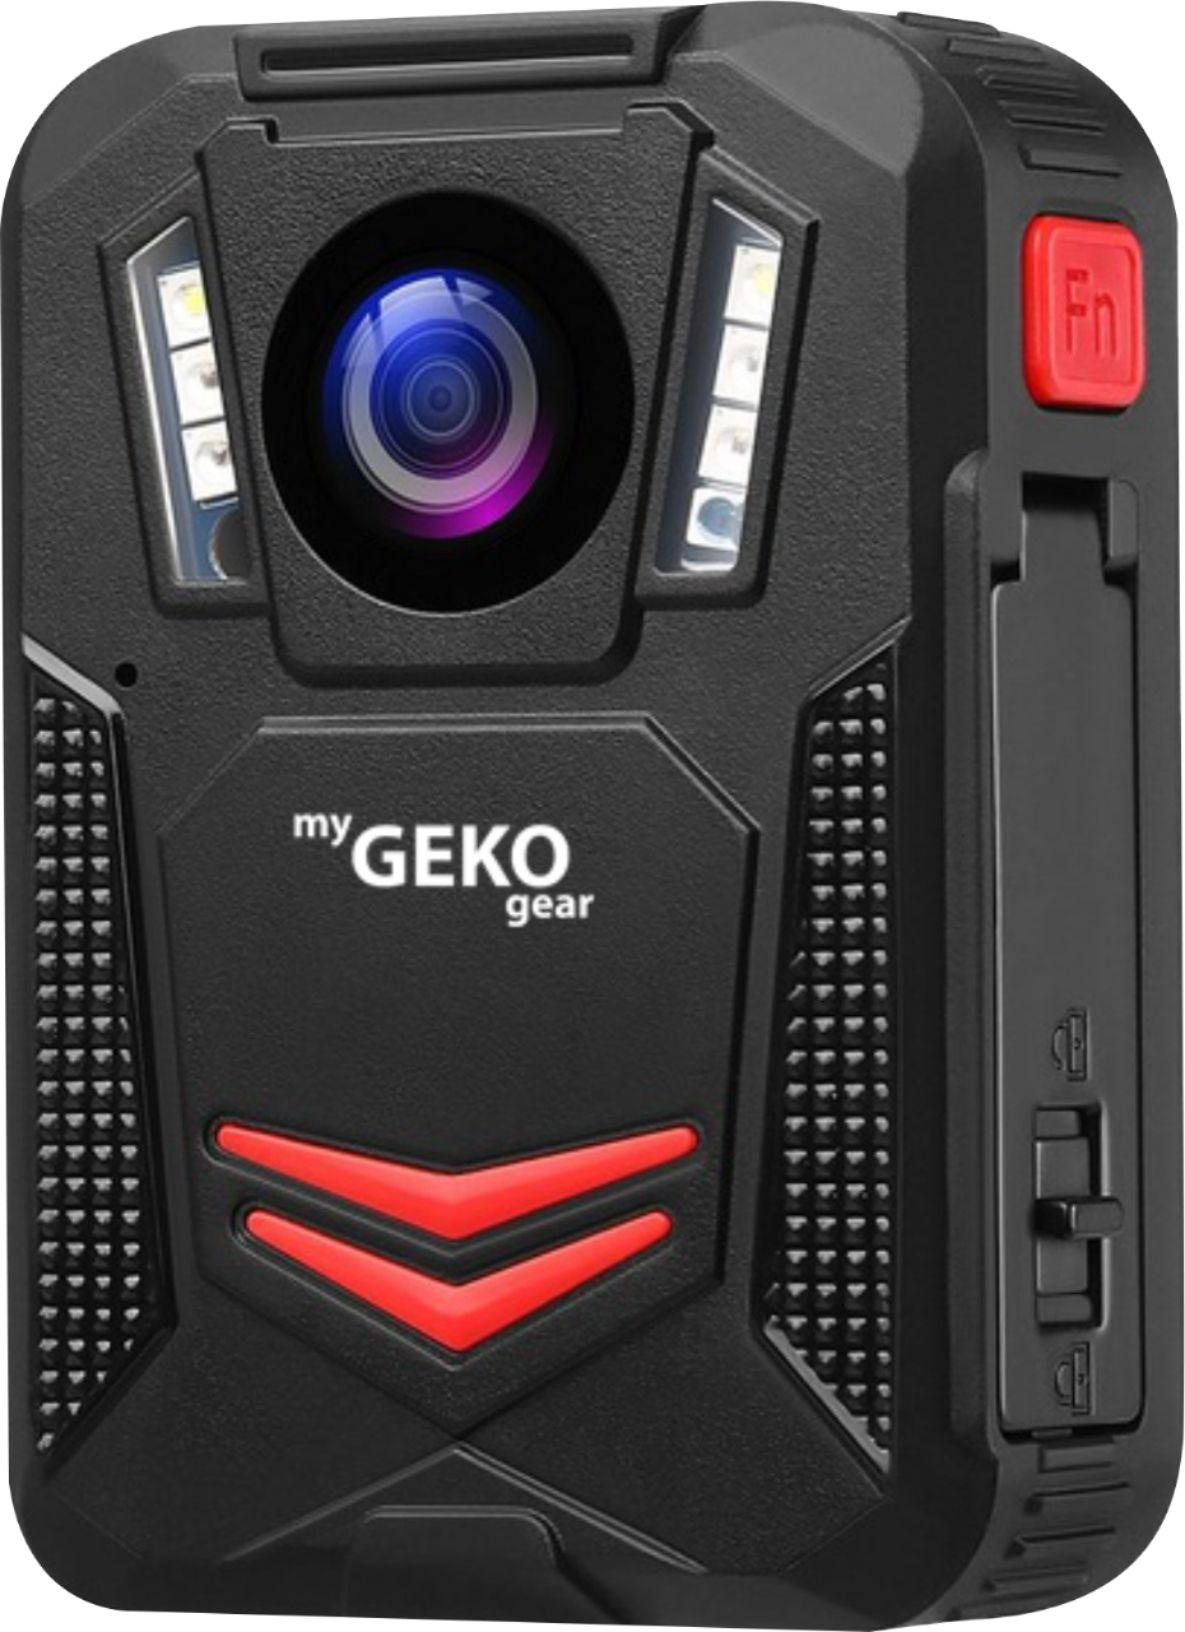 Left View: myGEKOgear - Aegis 100 1296p Body Camera Infrared Lights Water Resistance with Password Protected System 32GB Memory